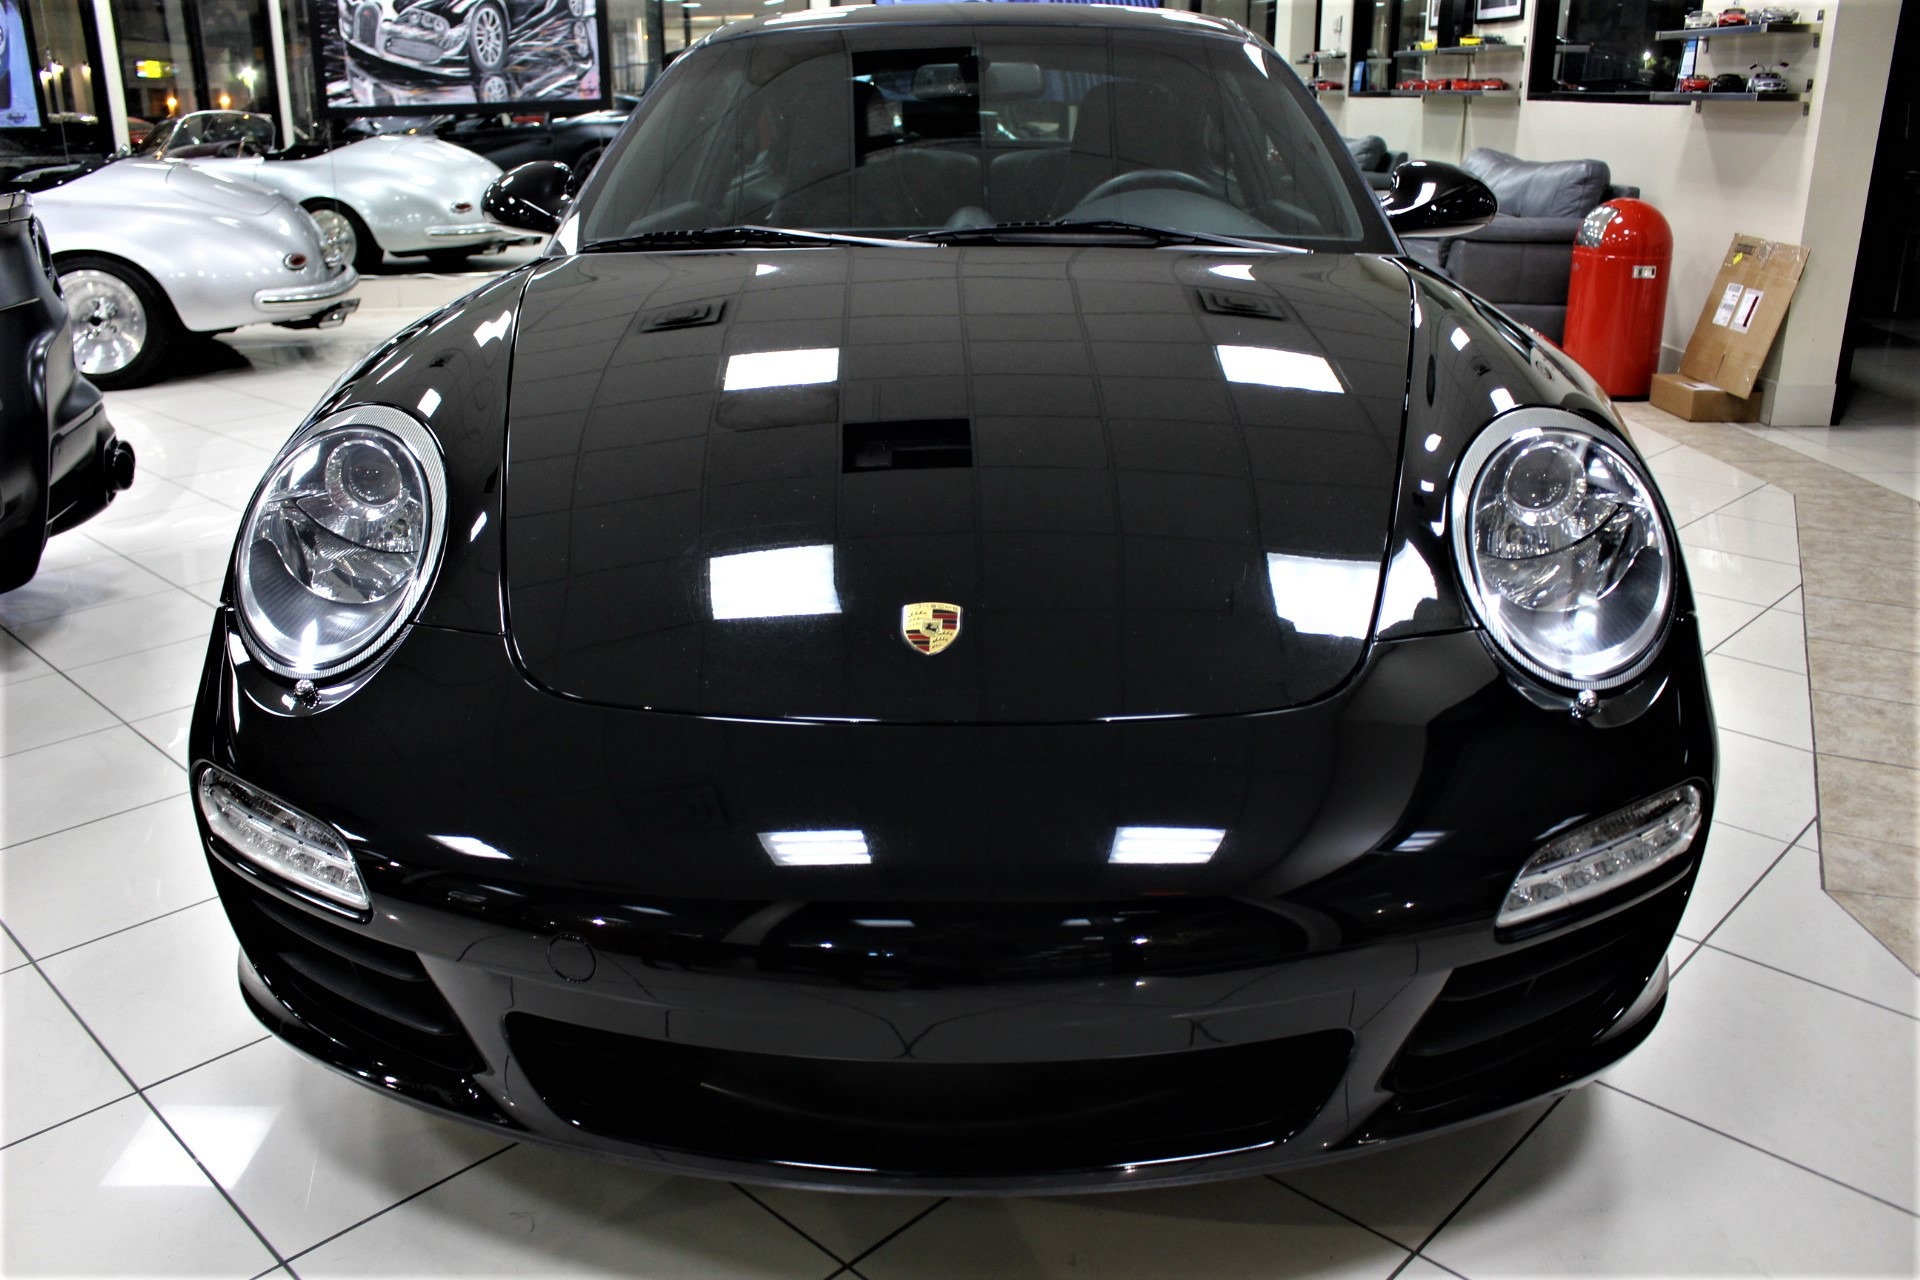 Used 2009 Porsche 911 Carrera S for sale Sold at The Gables Sports Cars in Miami FL 33146 4